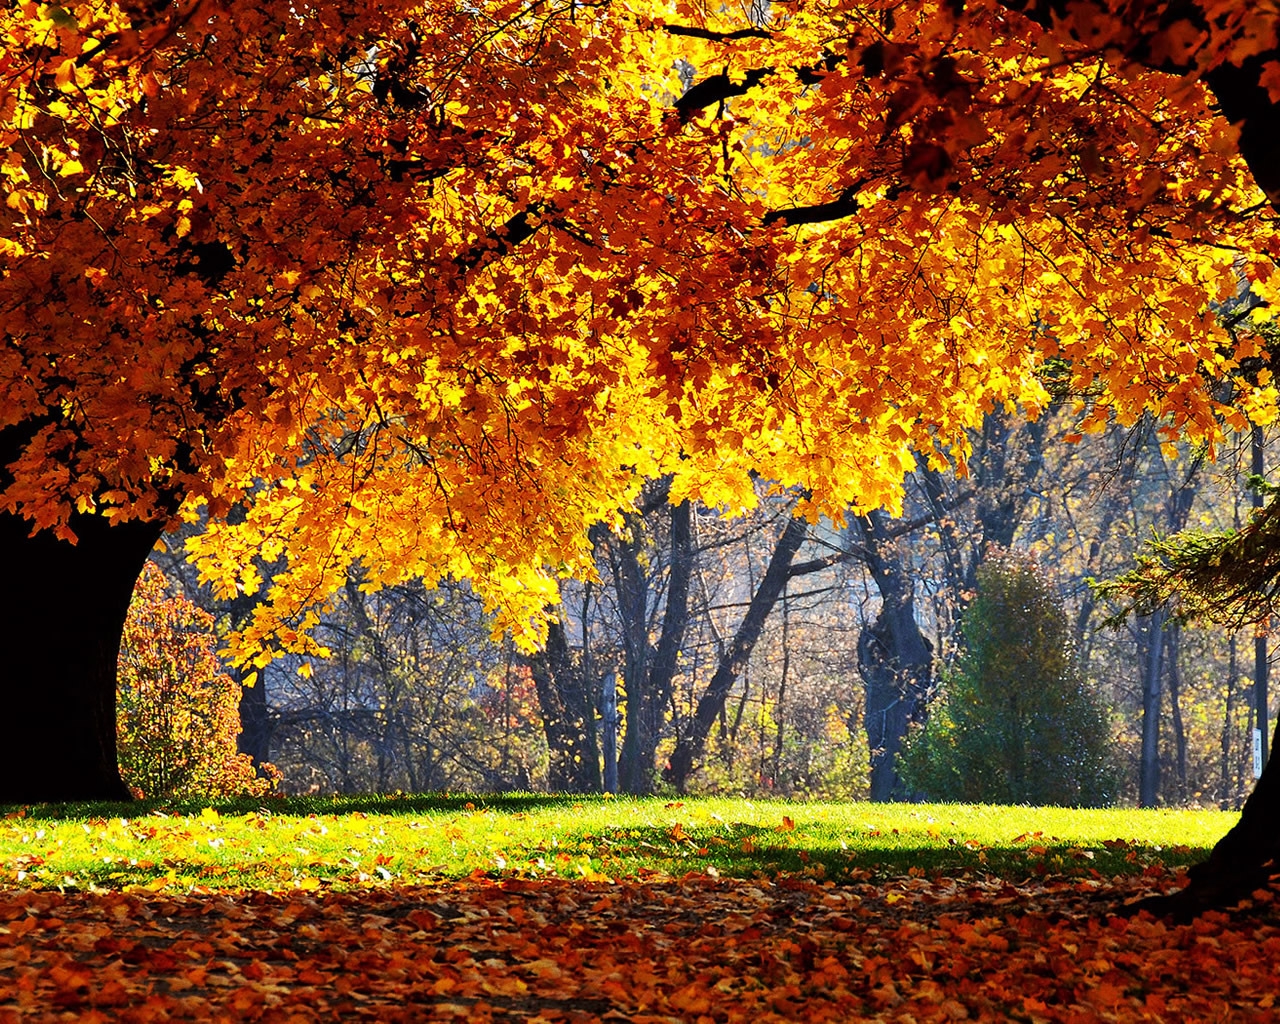 Autumn colors over trees for 1280 x 1024 resolution